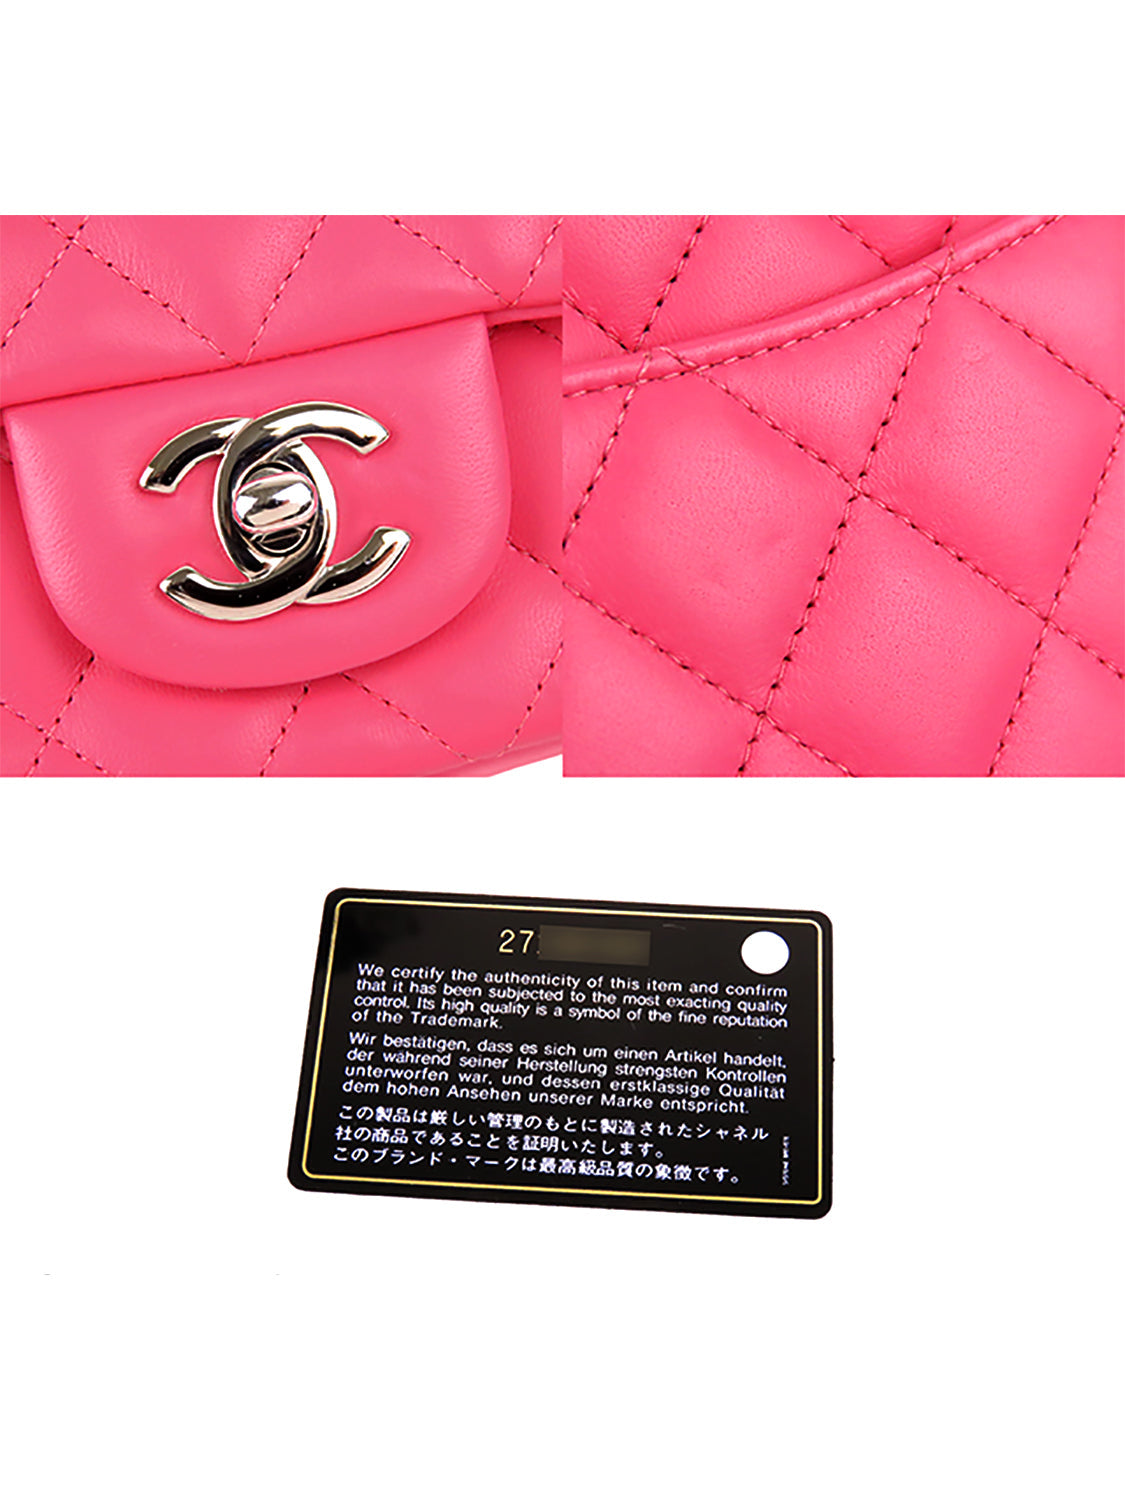 Chanel 2018/2019 Pink Flap